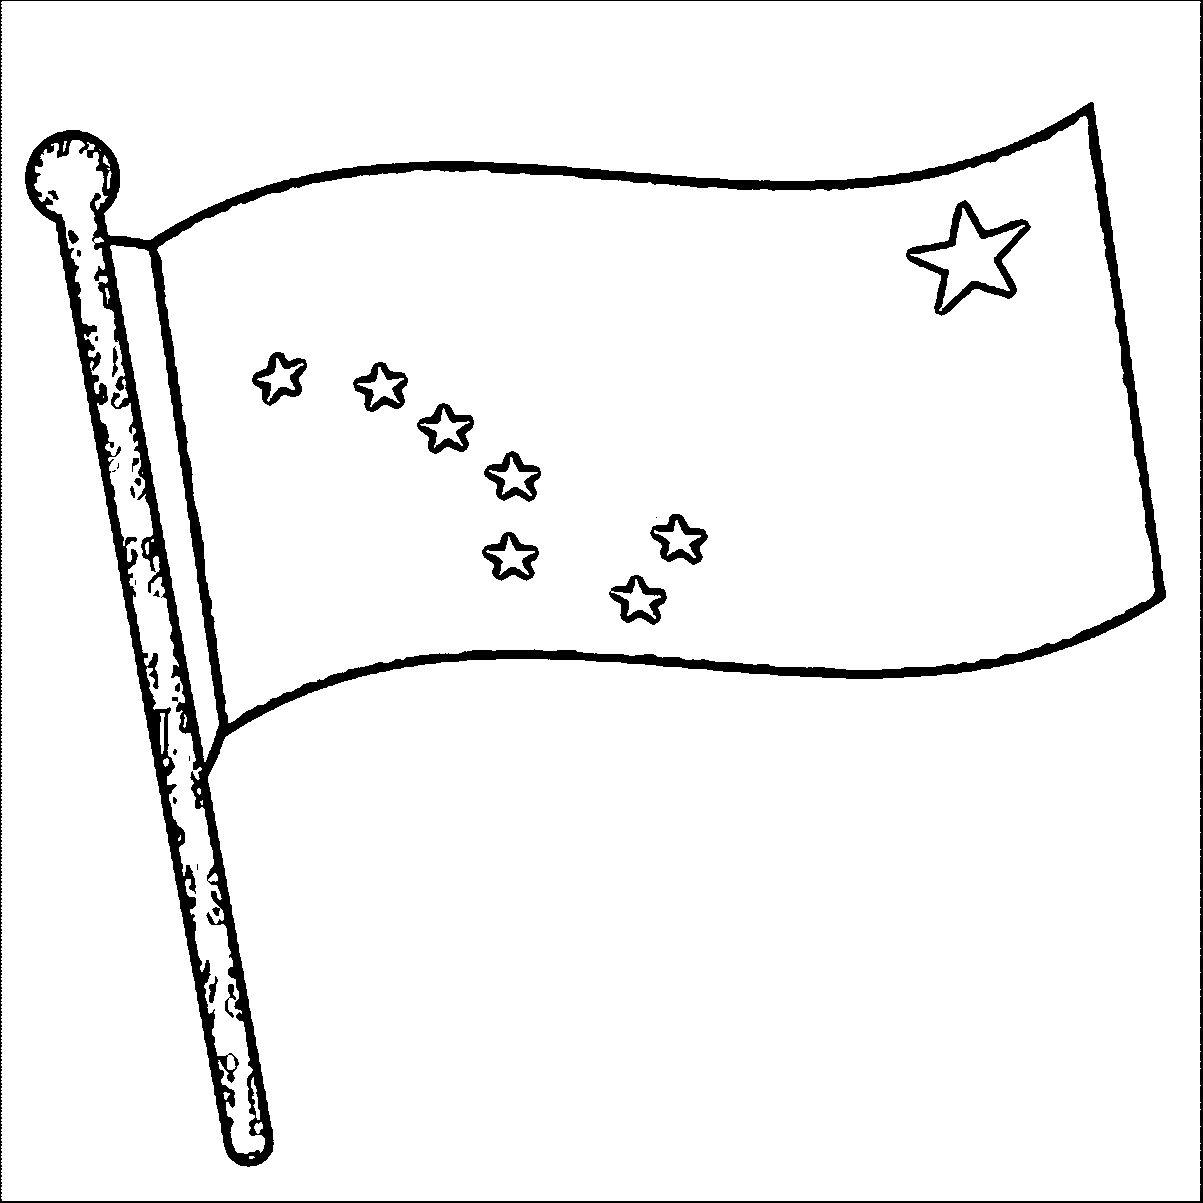 Alaska Flag Coloring Page Alaska Flag Coloring Page Coloring Home